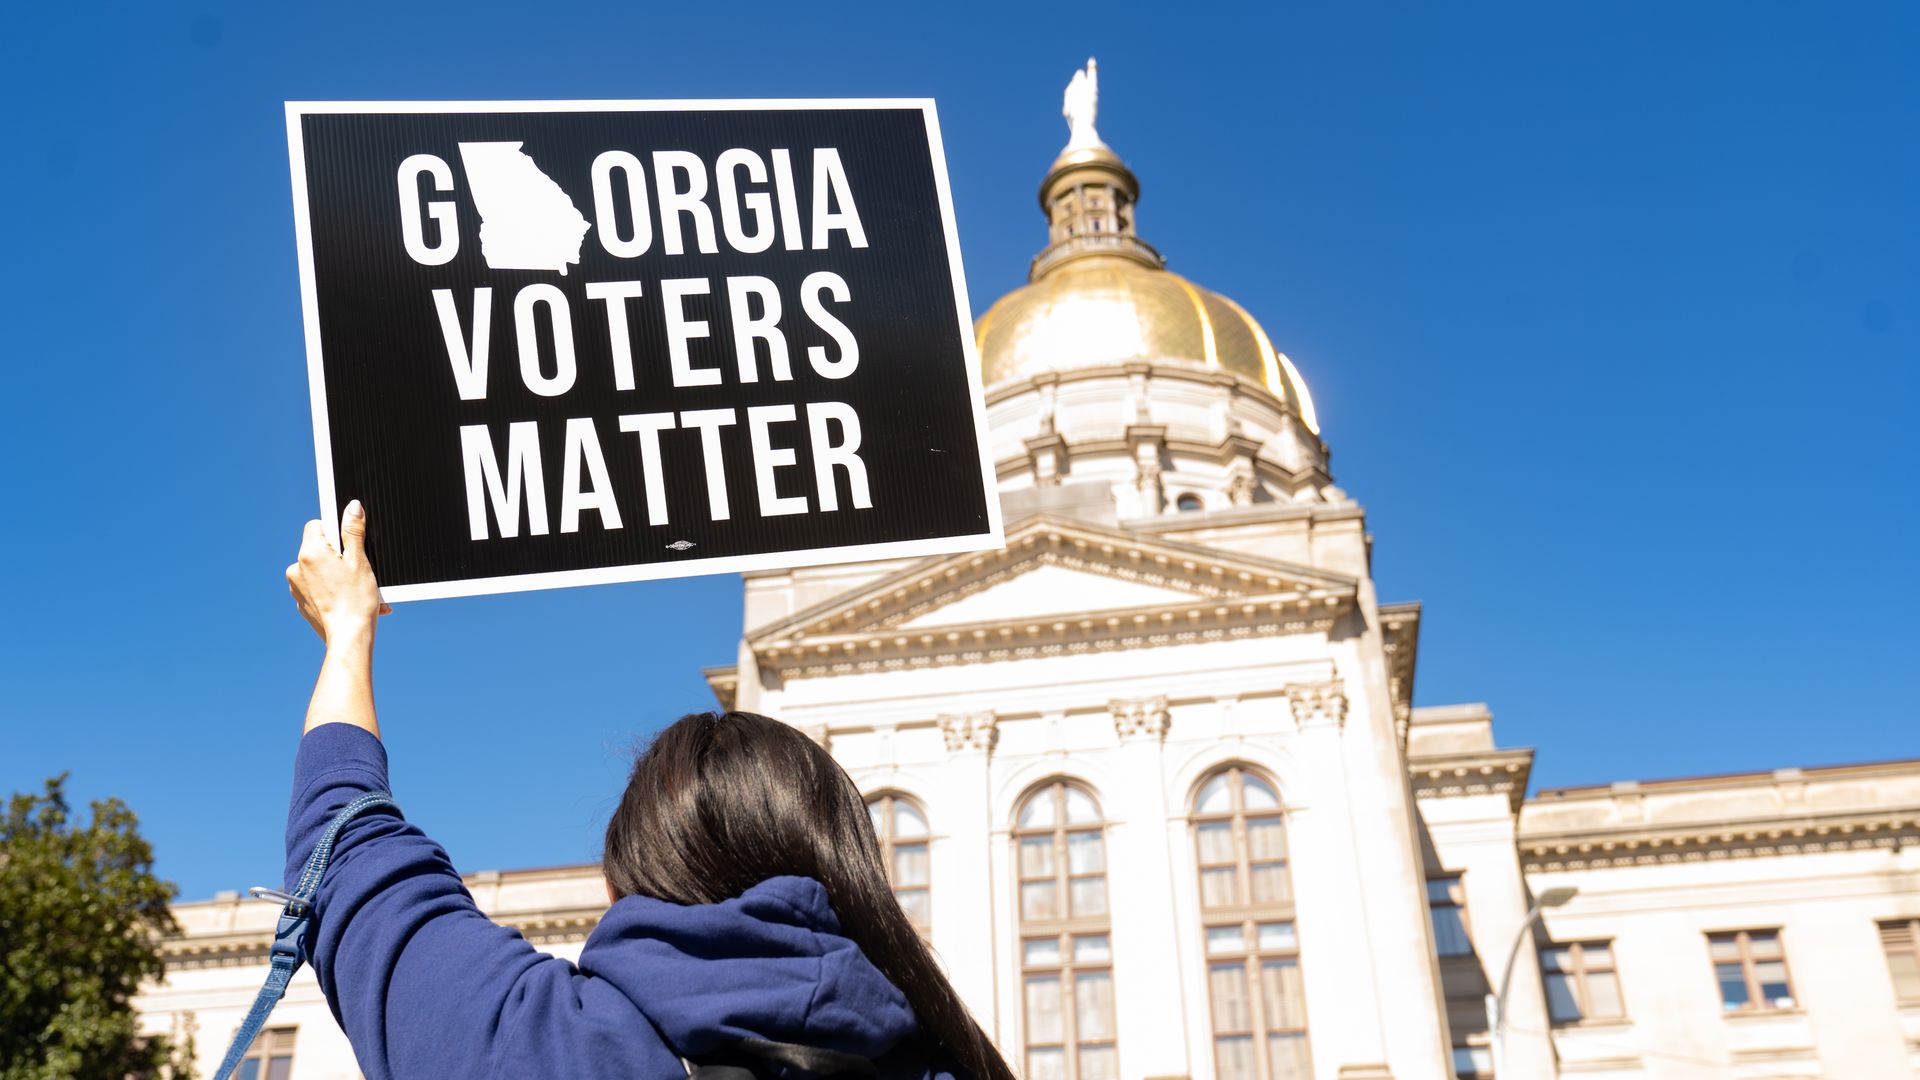 Photo of a person holding up a sign that says "Georgia voters matter" with the Georgia state capitol building in the backdrop